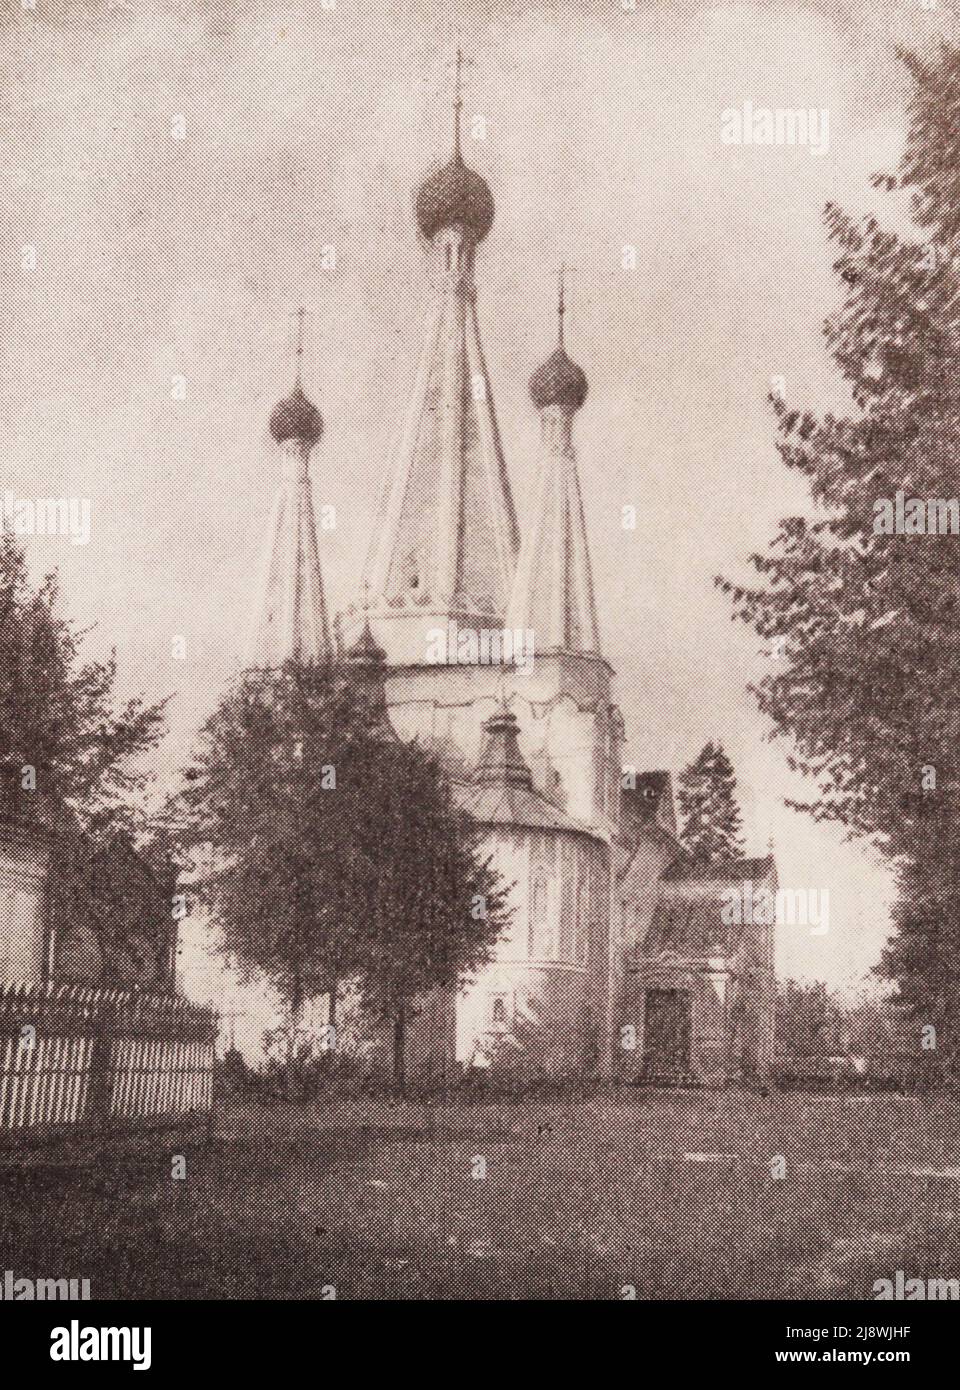 Dormition Wonderful Church of Alekseevsky Monastery in Uglich. Photo from the end of the 19th century. Stock Photo